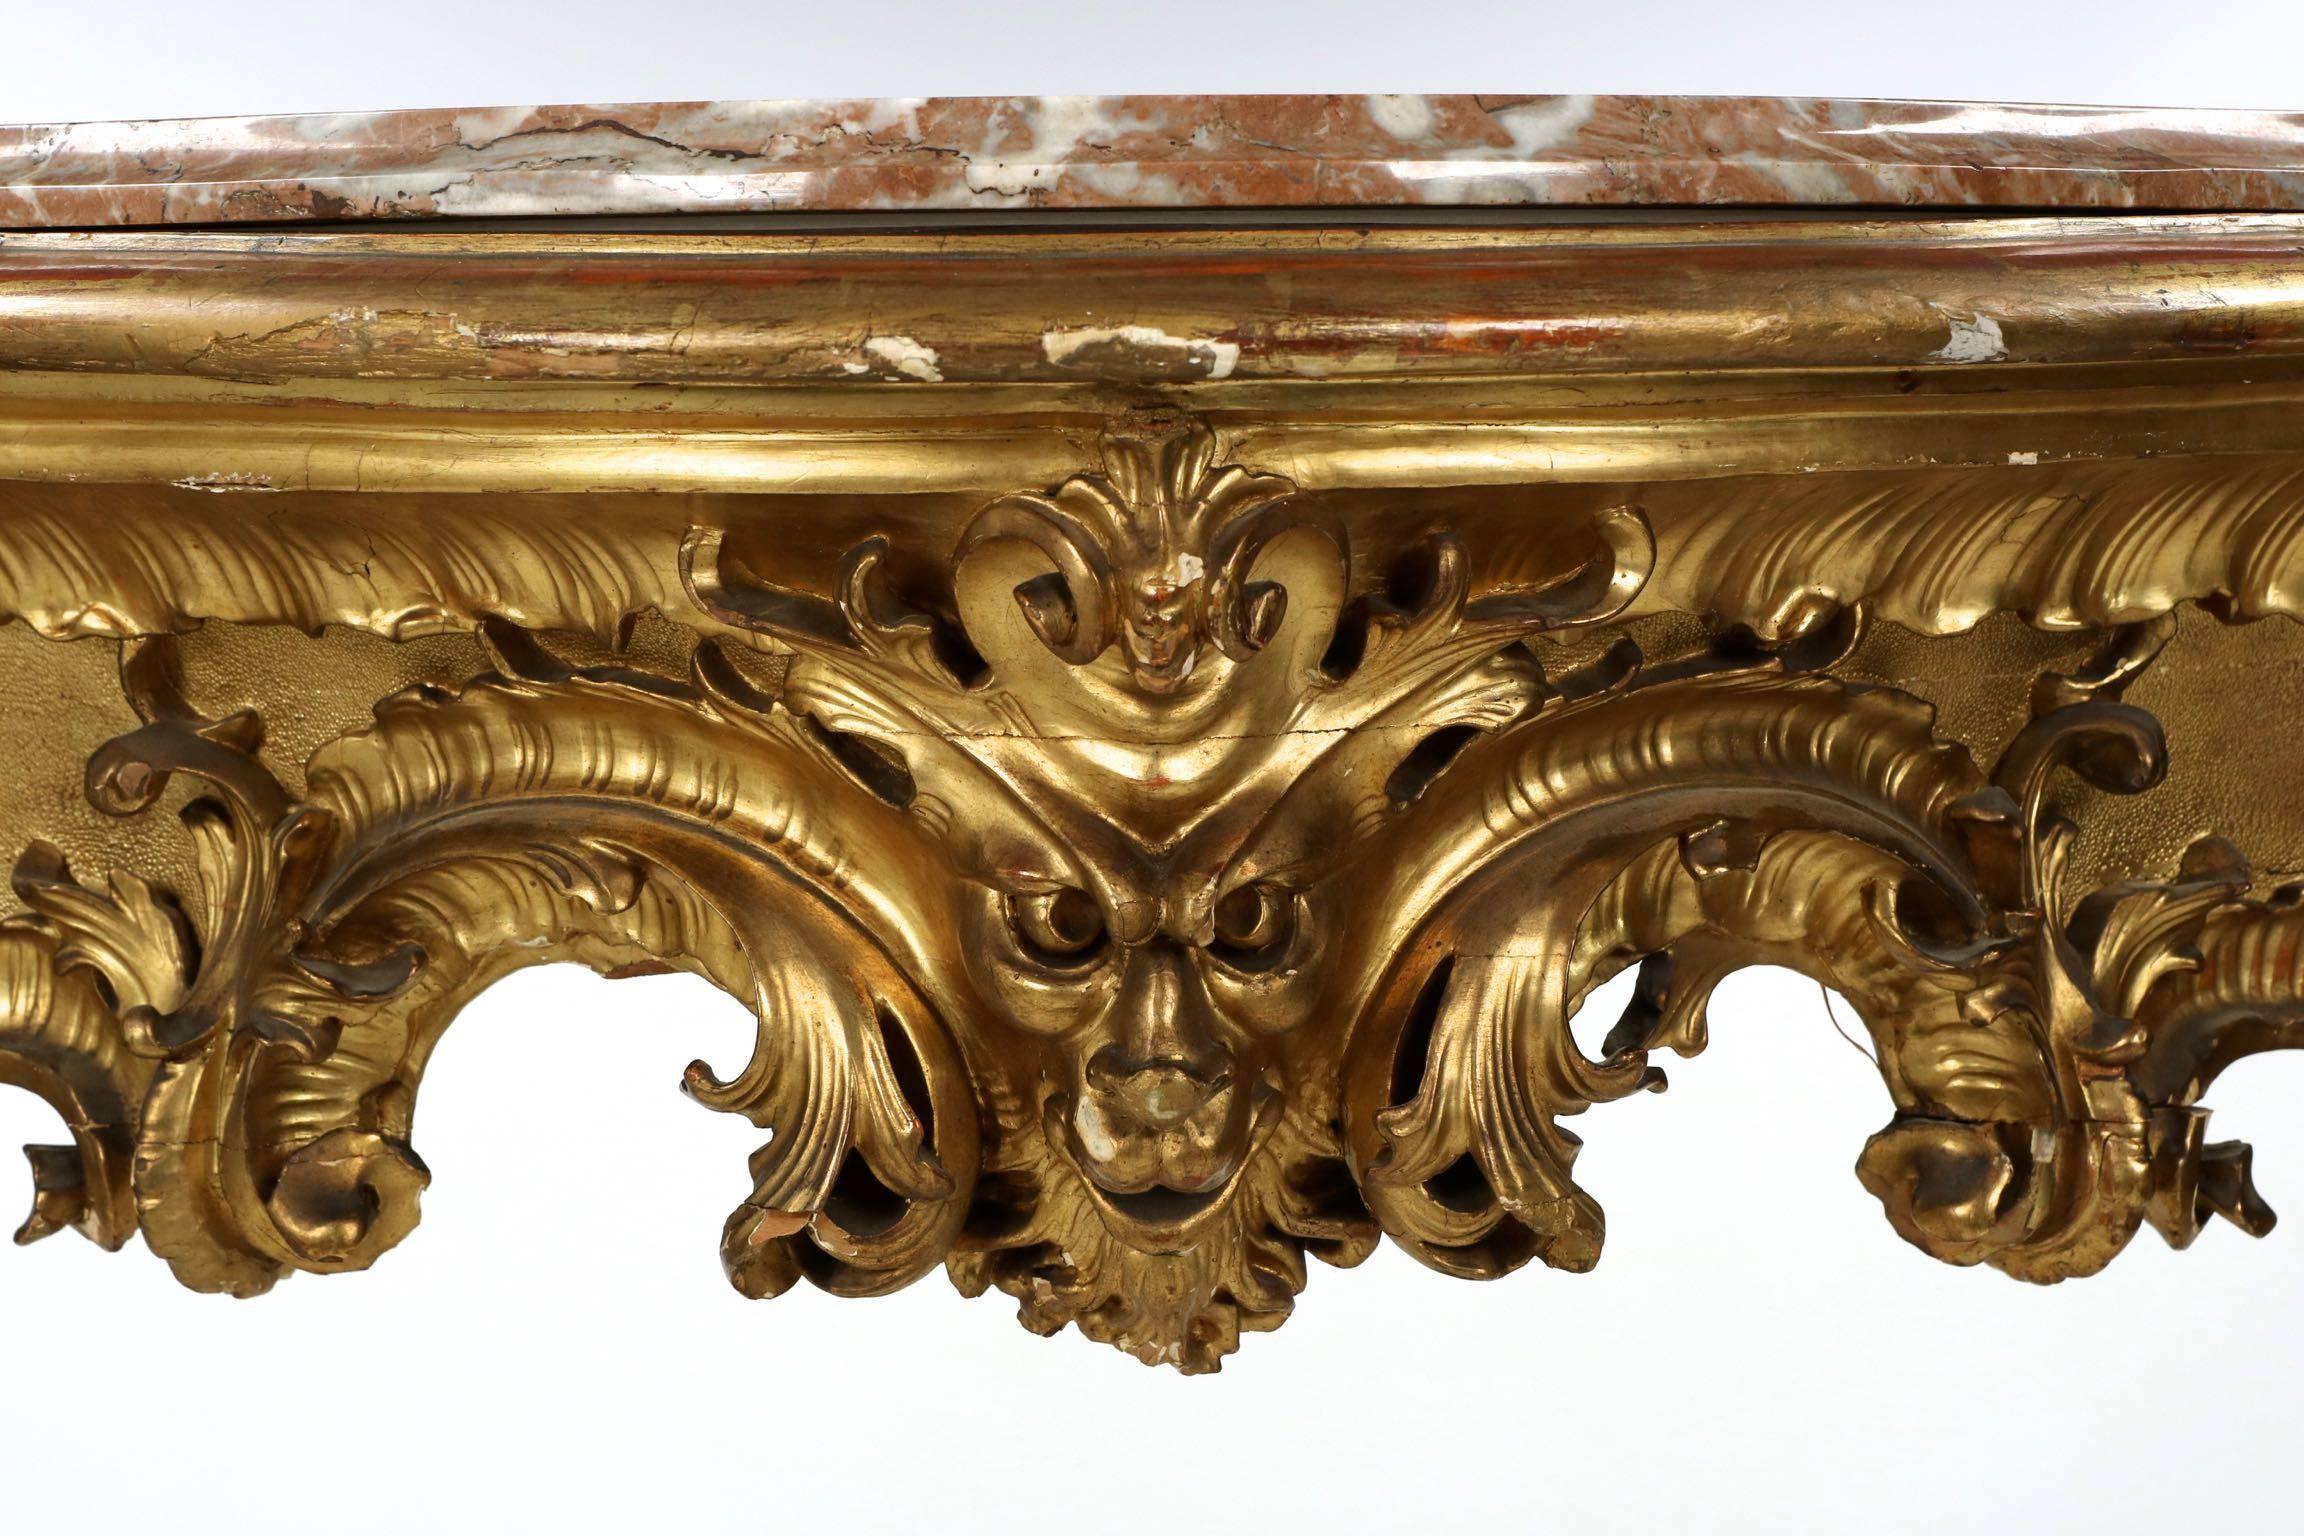 A most vigorous and fluid work from the third quarter of the 19th century, this gorgeous carved giltwood console table is most heavily embellished in the distinctive Louis XV taste, employing the luxurious excesses of Rococo to it’s fullest over